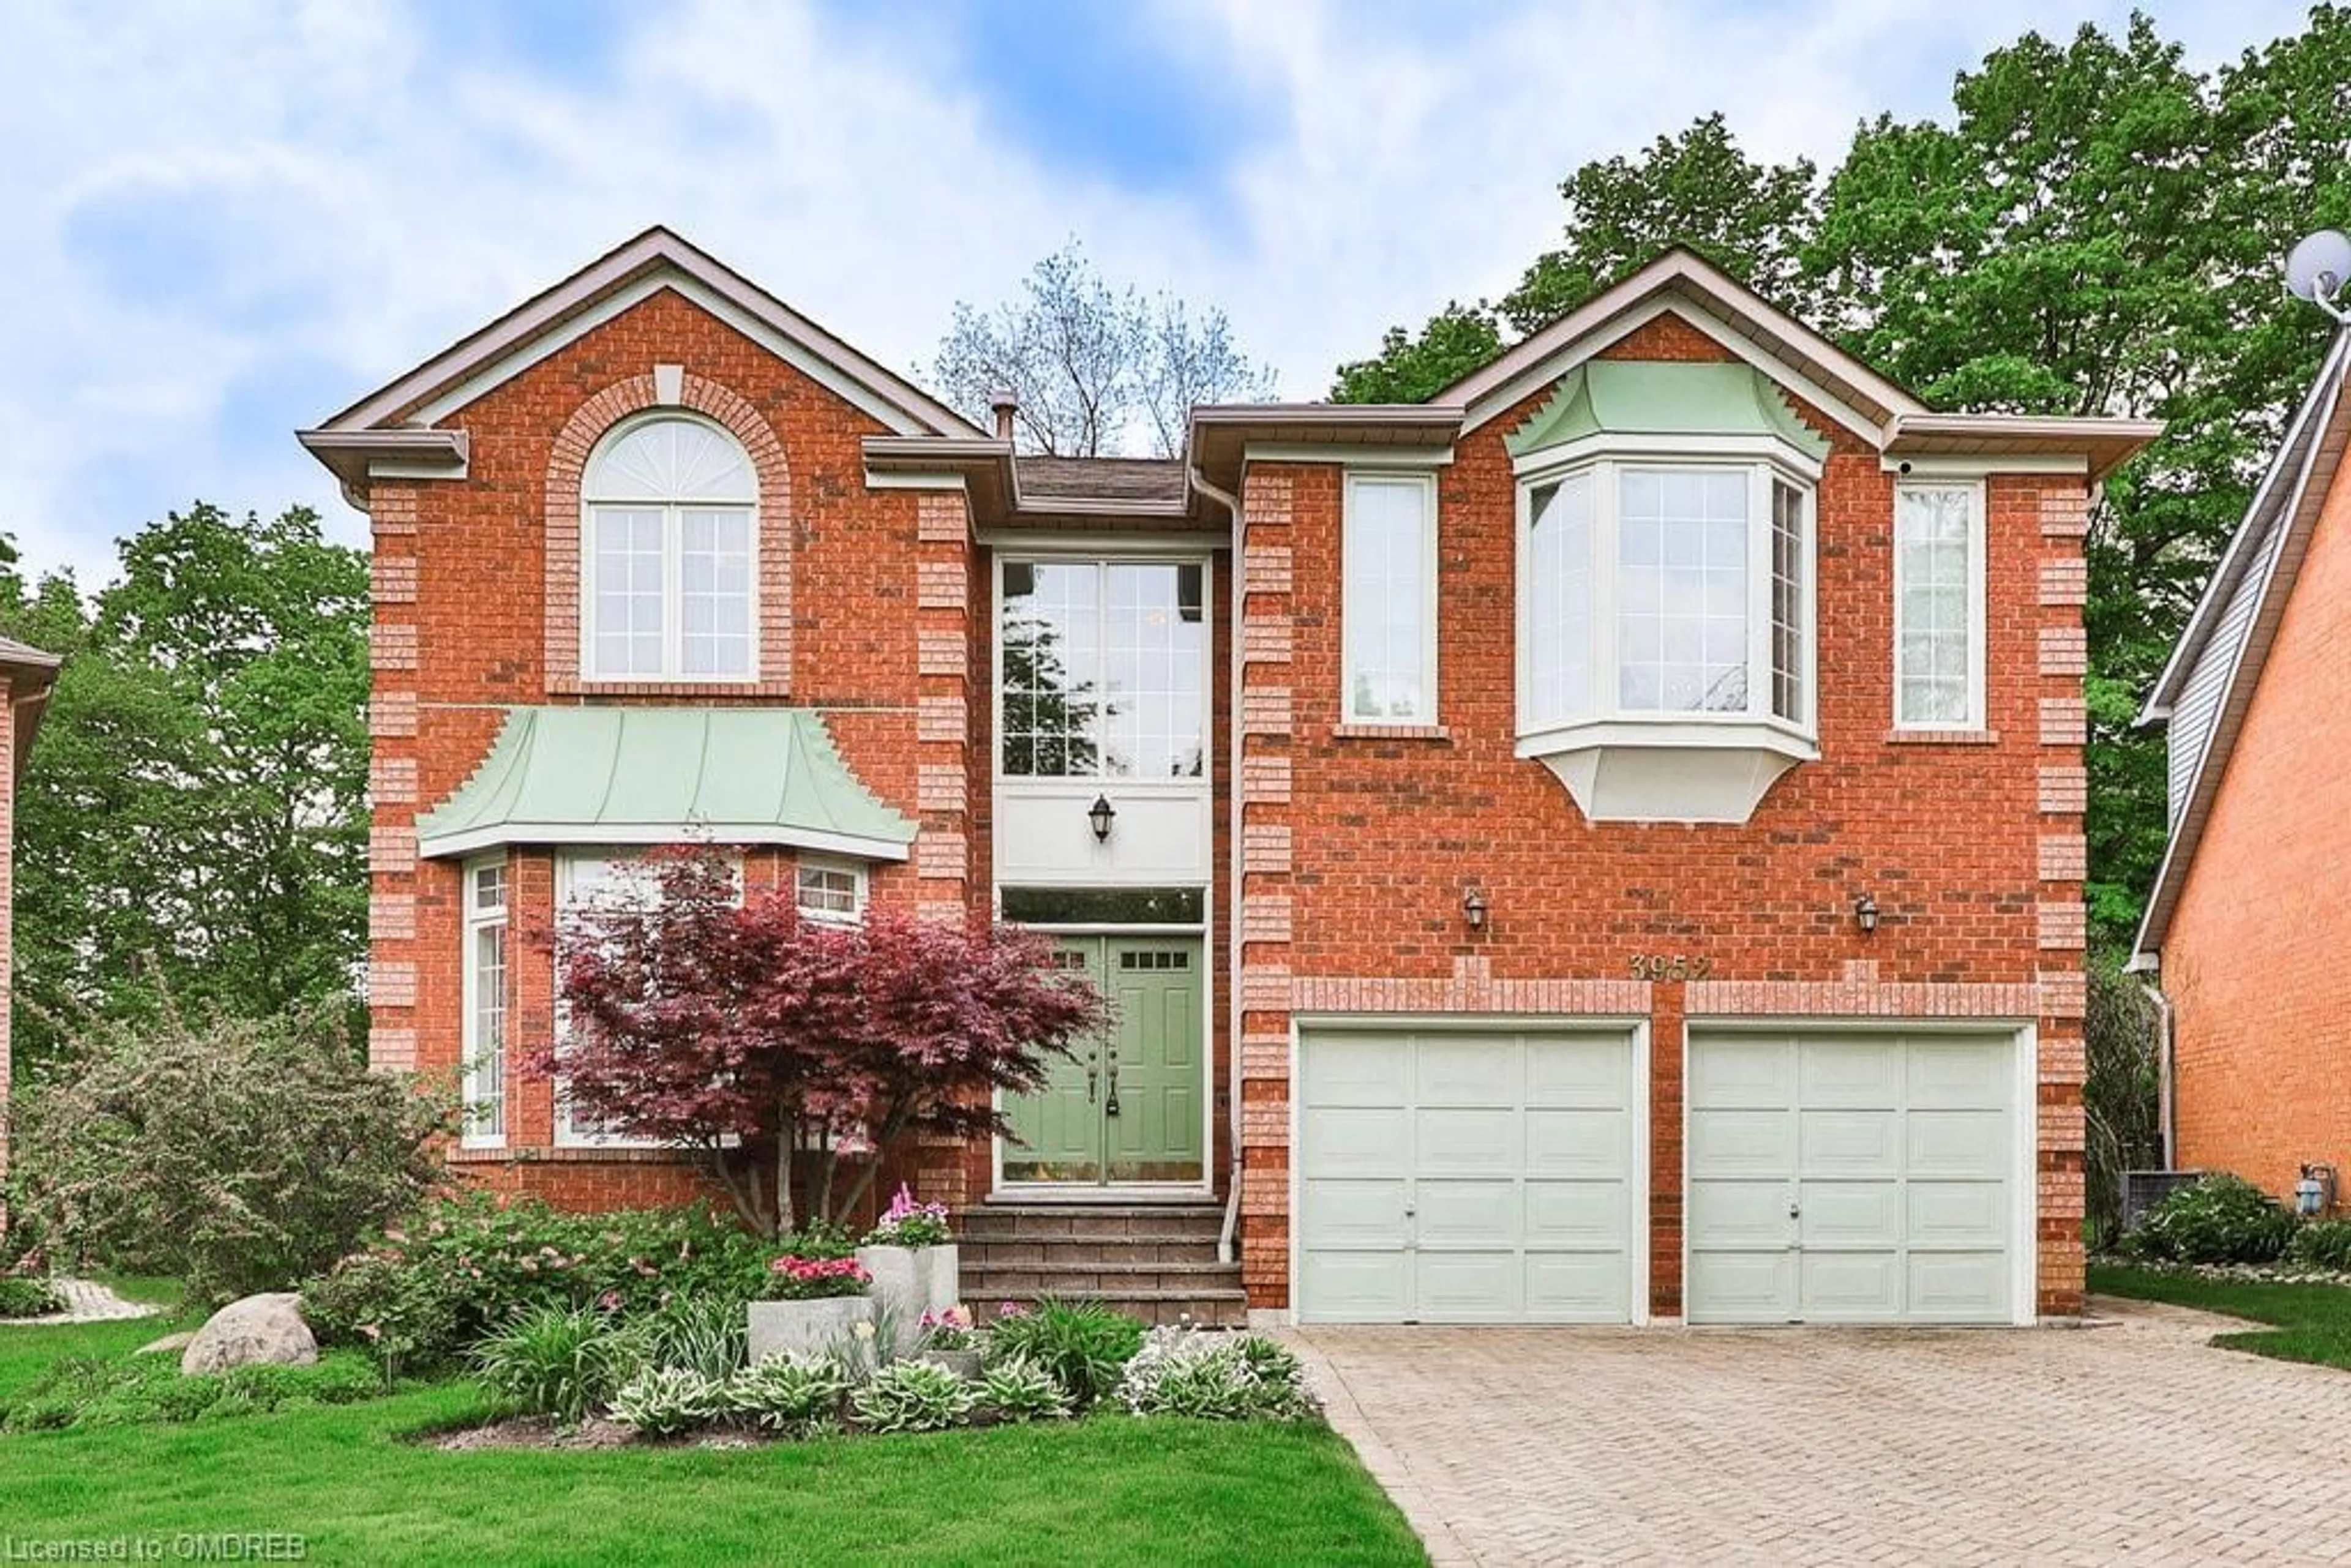 Home with brick exterior material for 3952 Rolling Valley Dr, Mississauga Ontario L5L 5V9